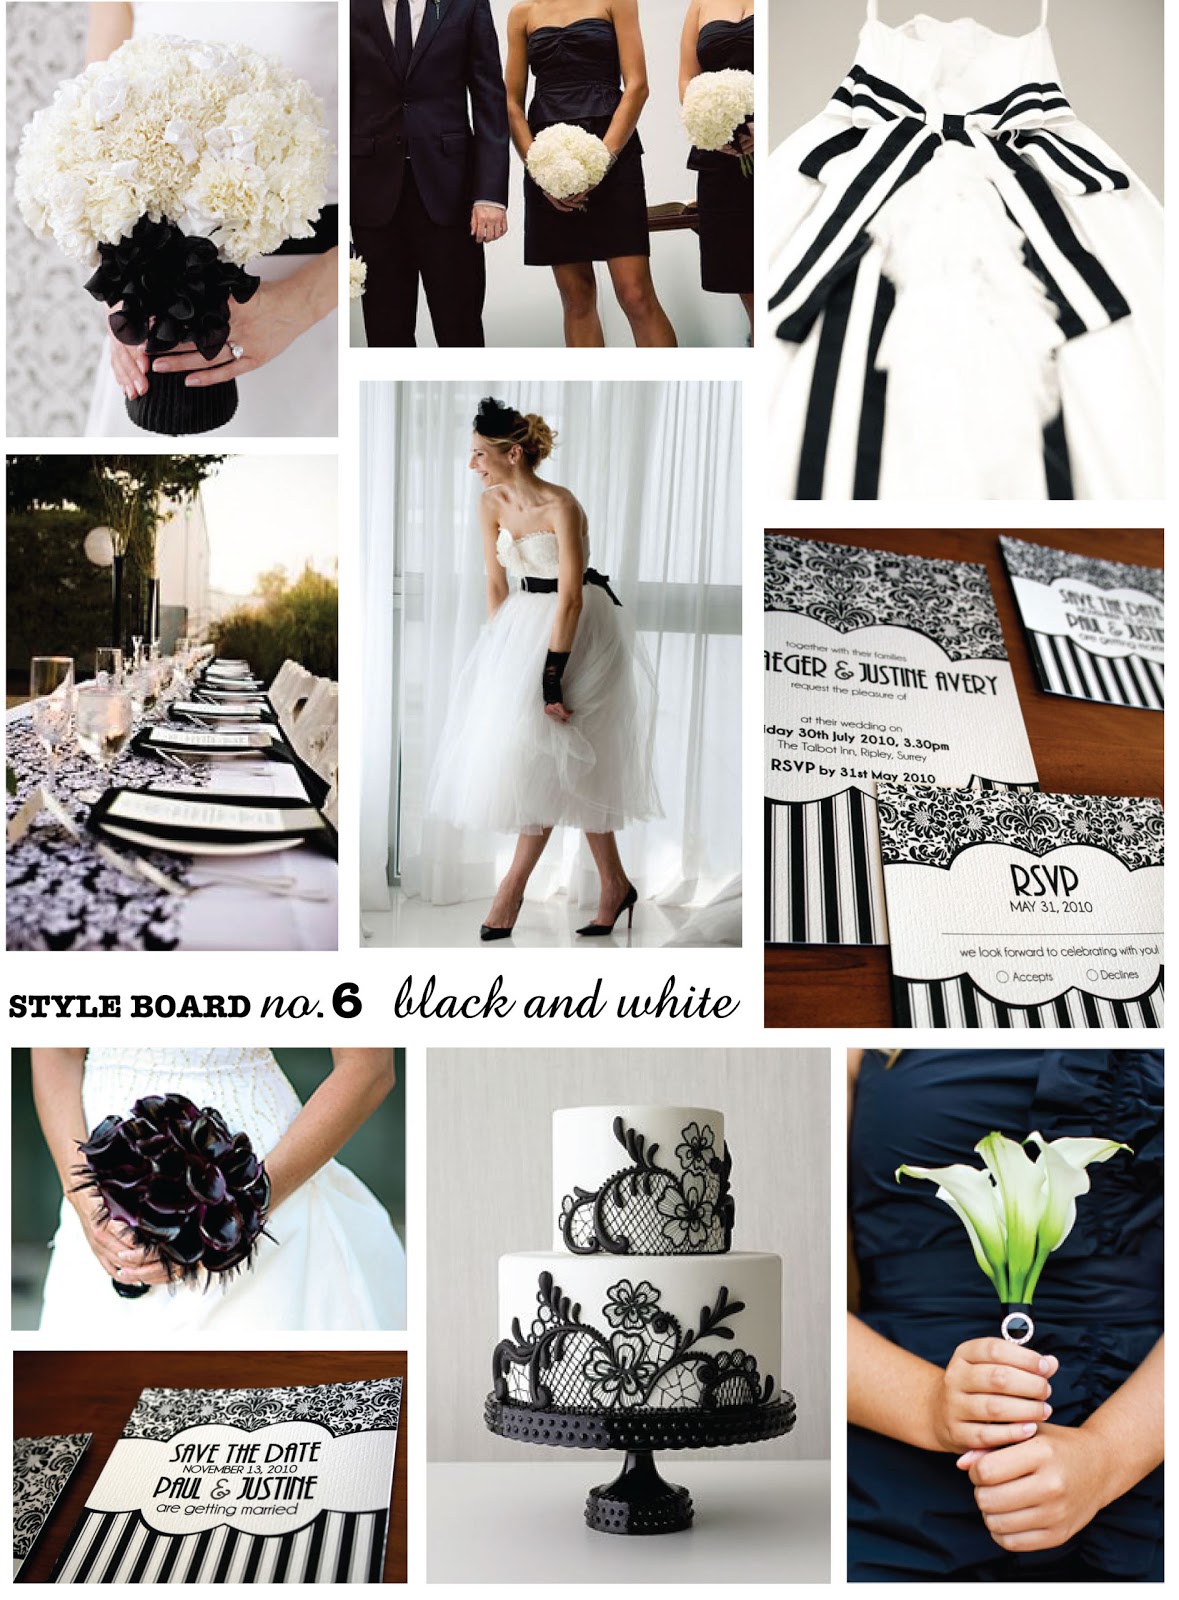 Wedding decor in black and